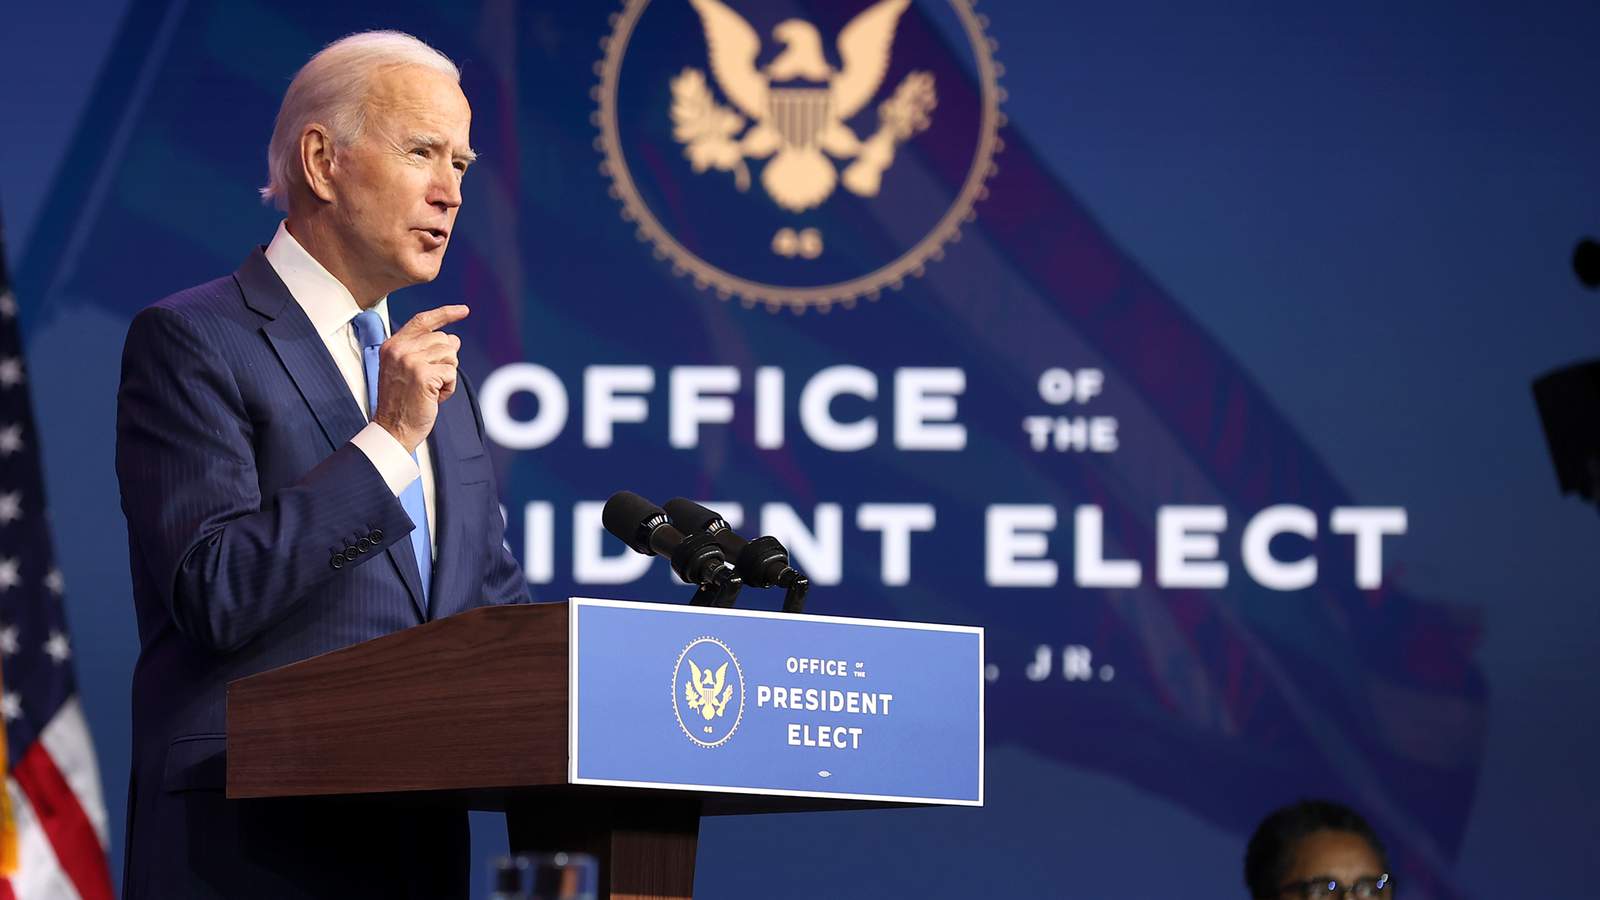 Biden officially reaches 270 Electoral College votes affirming his victory